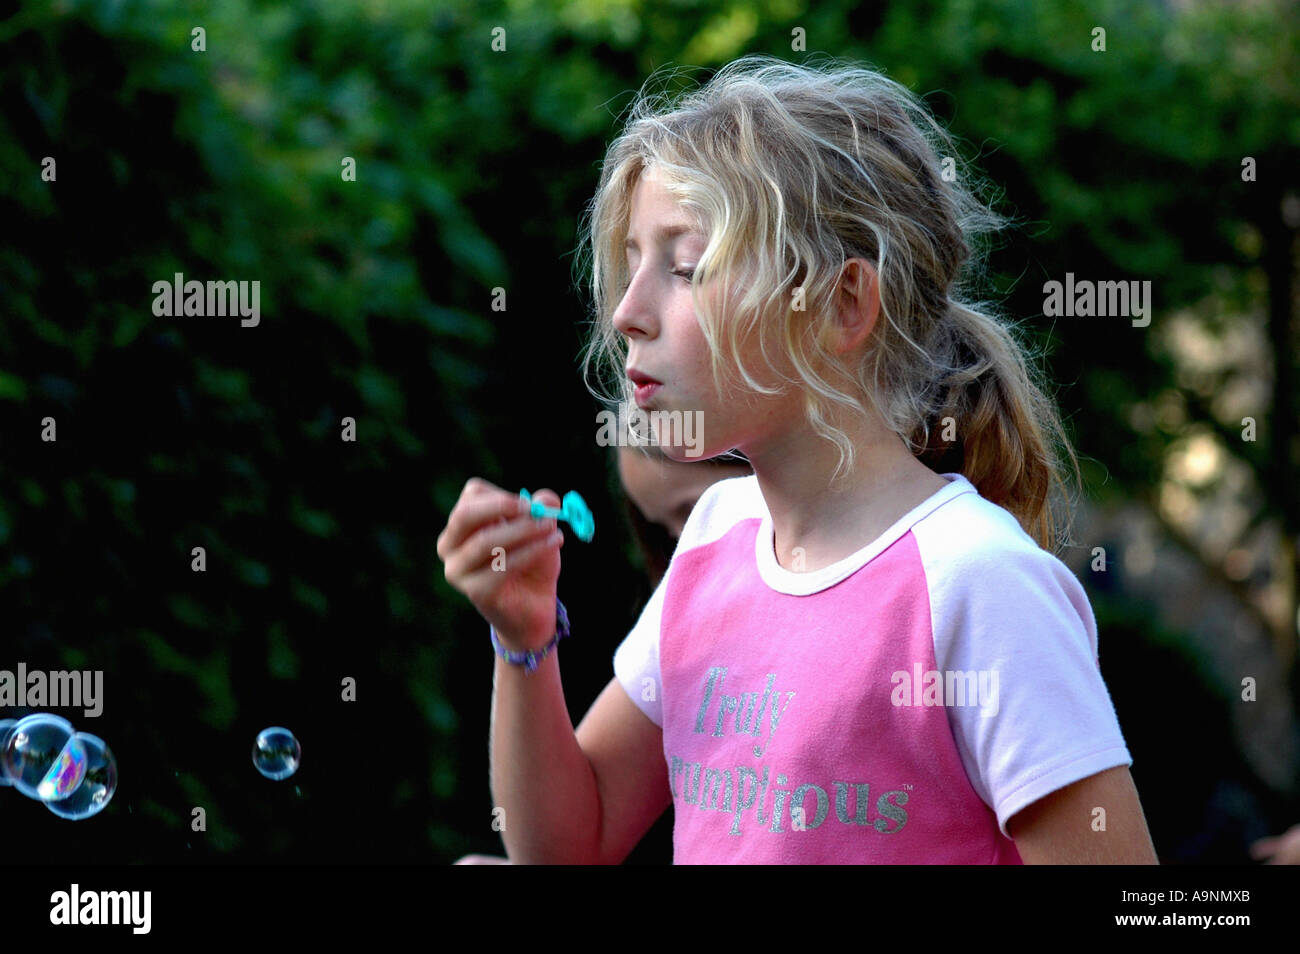 young girl blowing bubbles outside Stock Photo